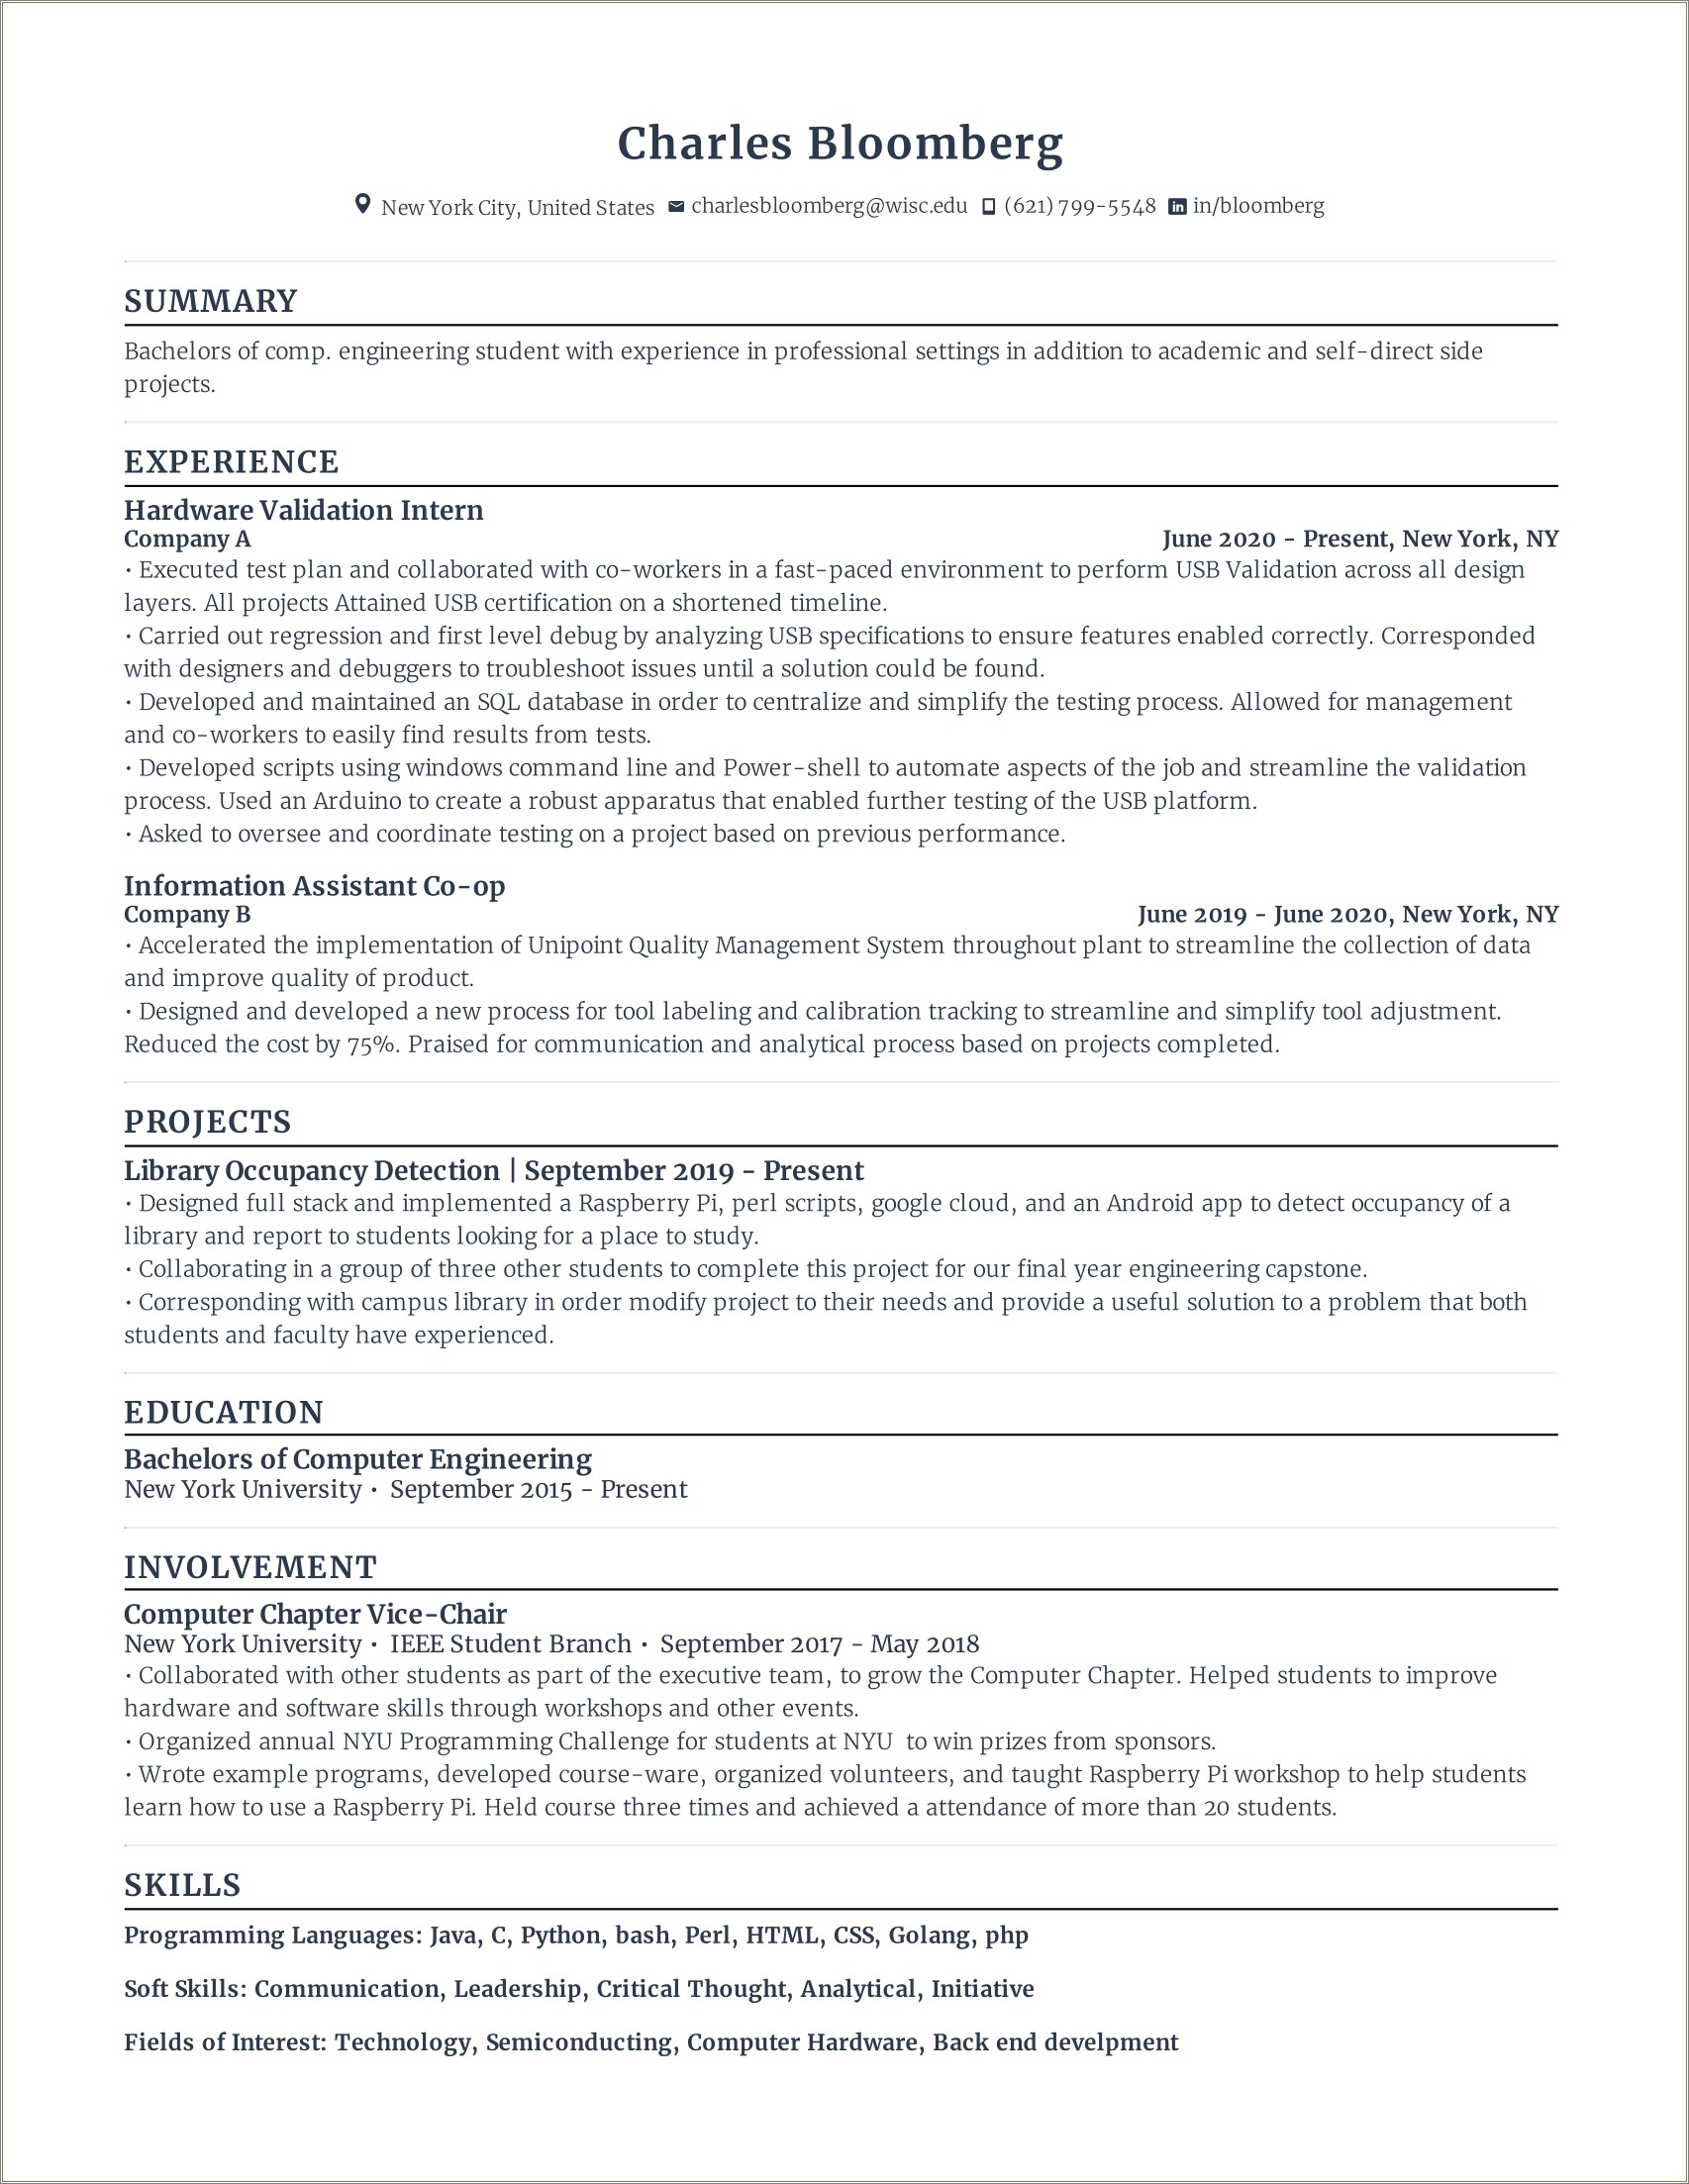 Embedded Systems Resume For 3 Year Experience